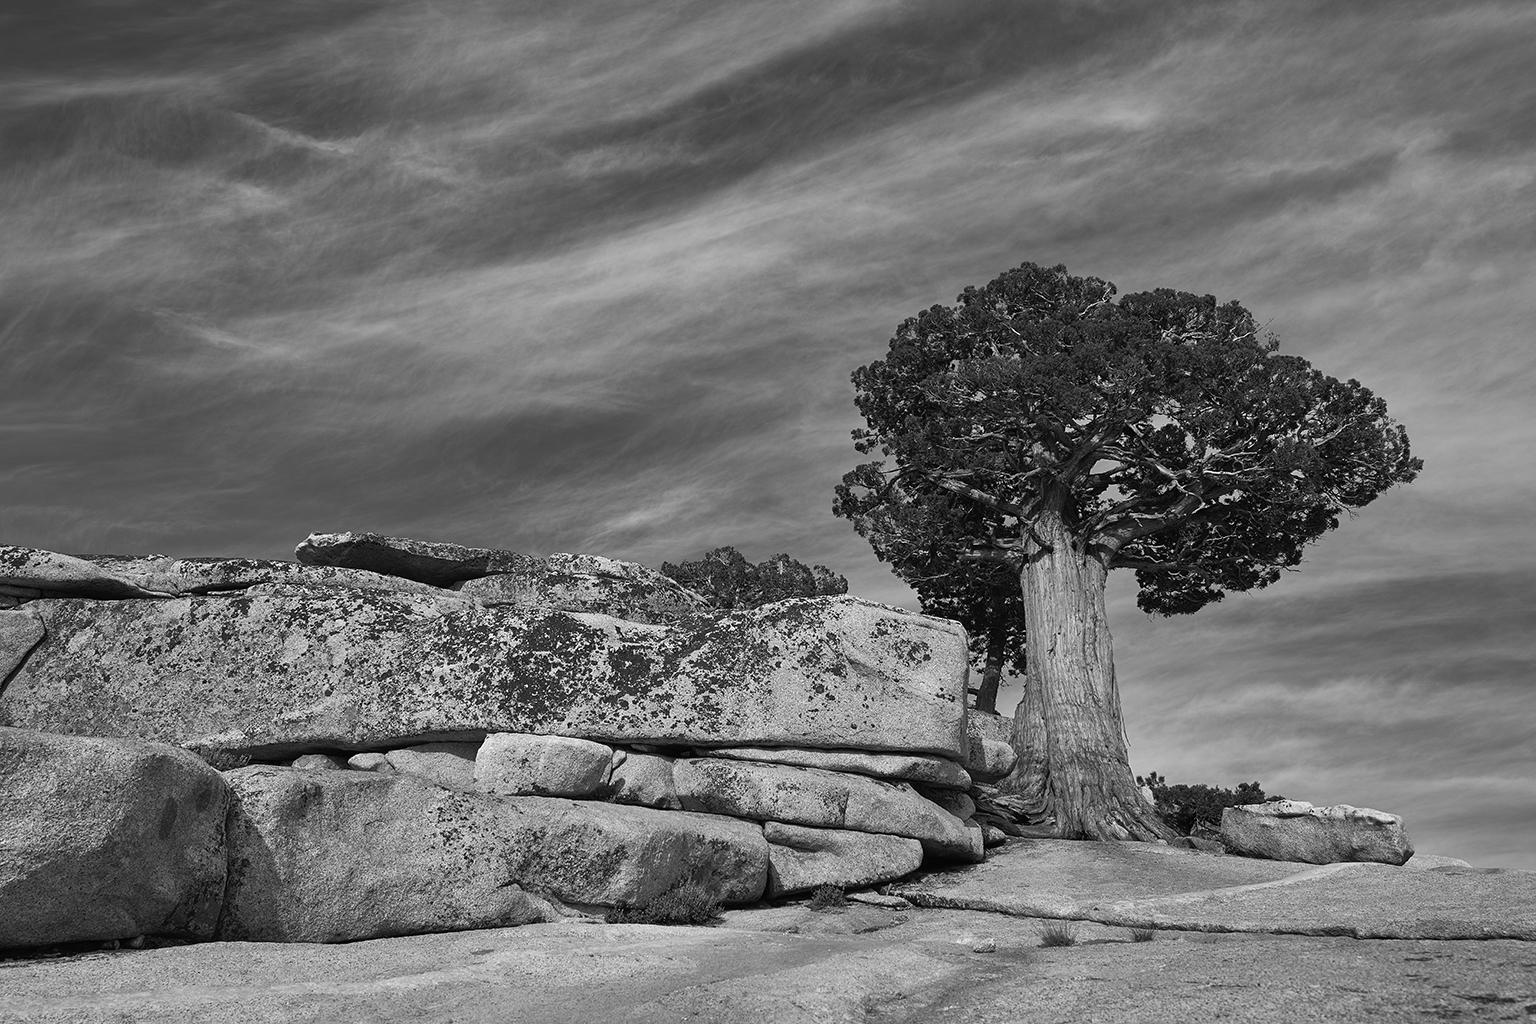 From a series of large scale black & white photographs capturing the ancient flora and dramatic arboretum of California's vast Sierra Nevada mountain landscapes, an homage to photography pioneer and nature preservationist Ansel Adams

48 x 72 inches